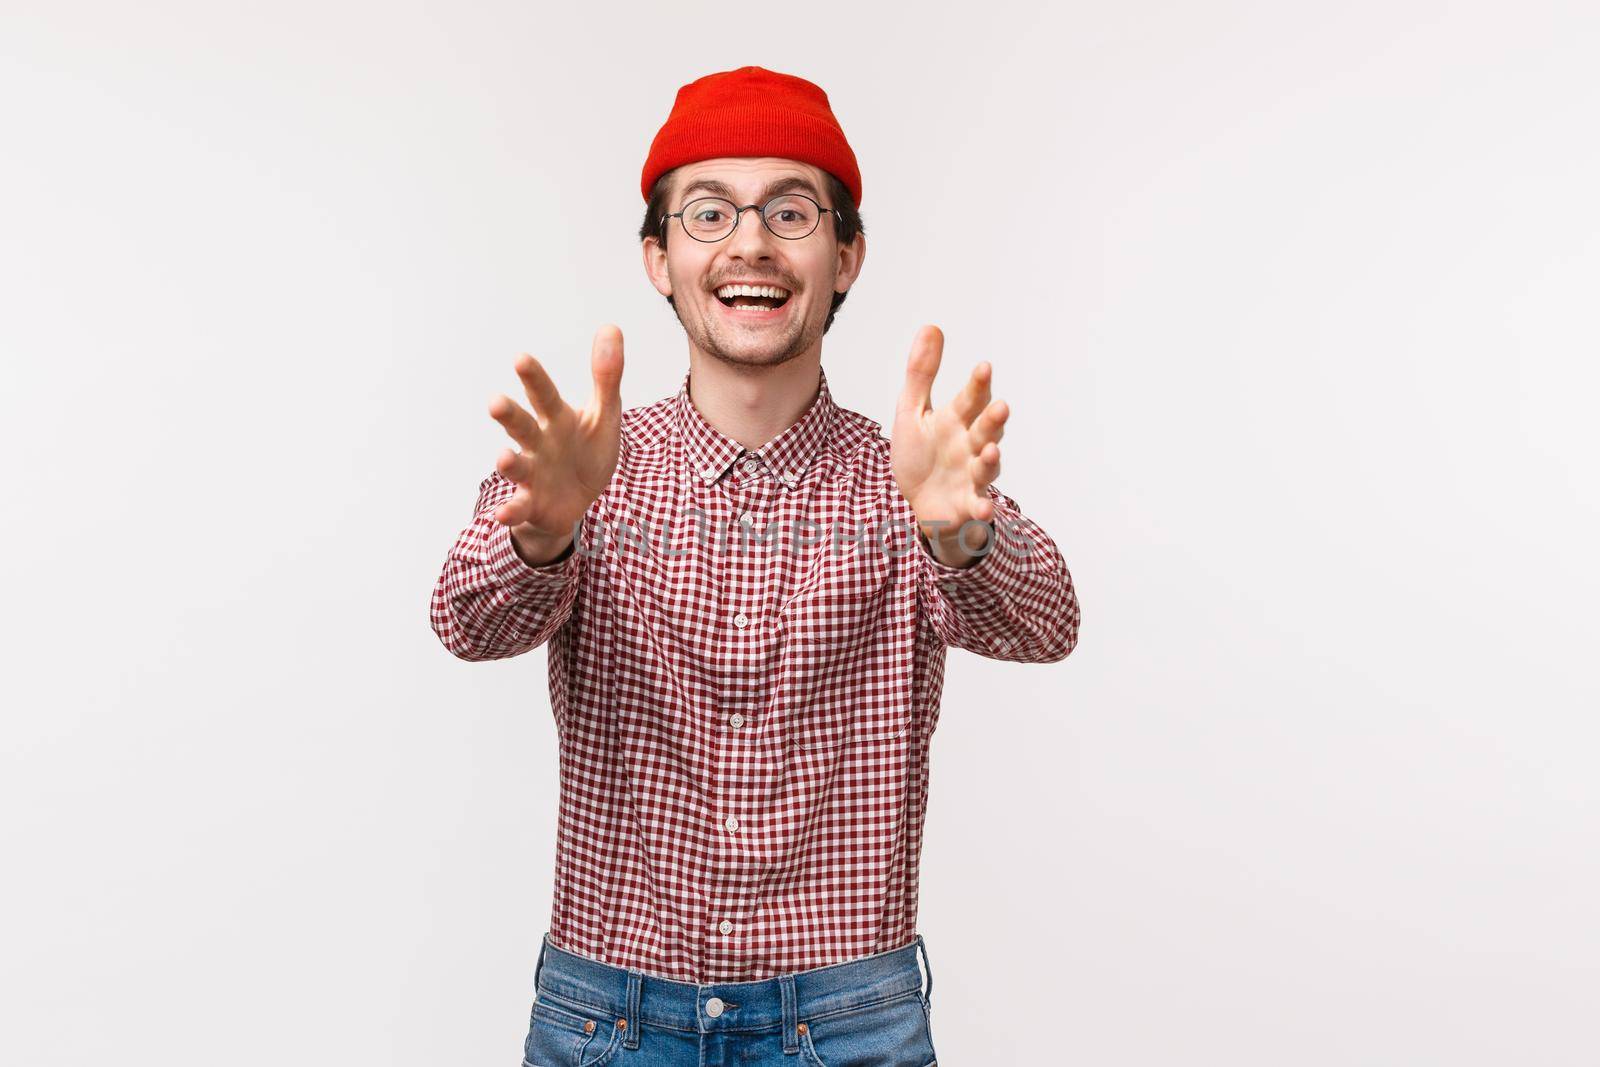 Waist-up portrait happy smiling caucasian man reaching something, raise hands to catch object, playing with friend, standing white background, waiting for pass, receive present.